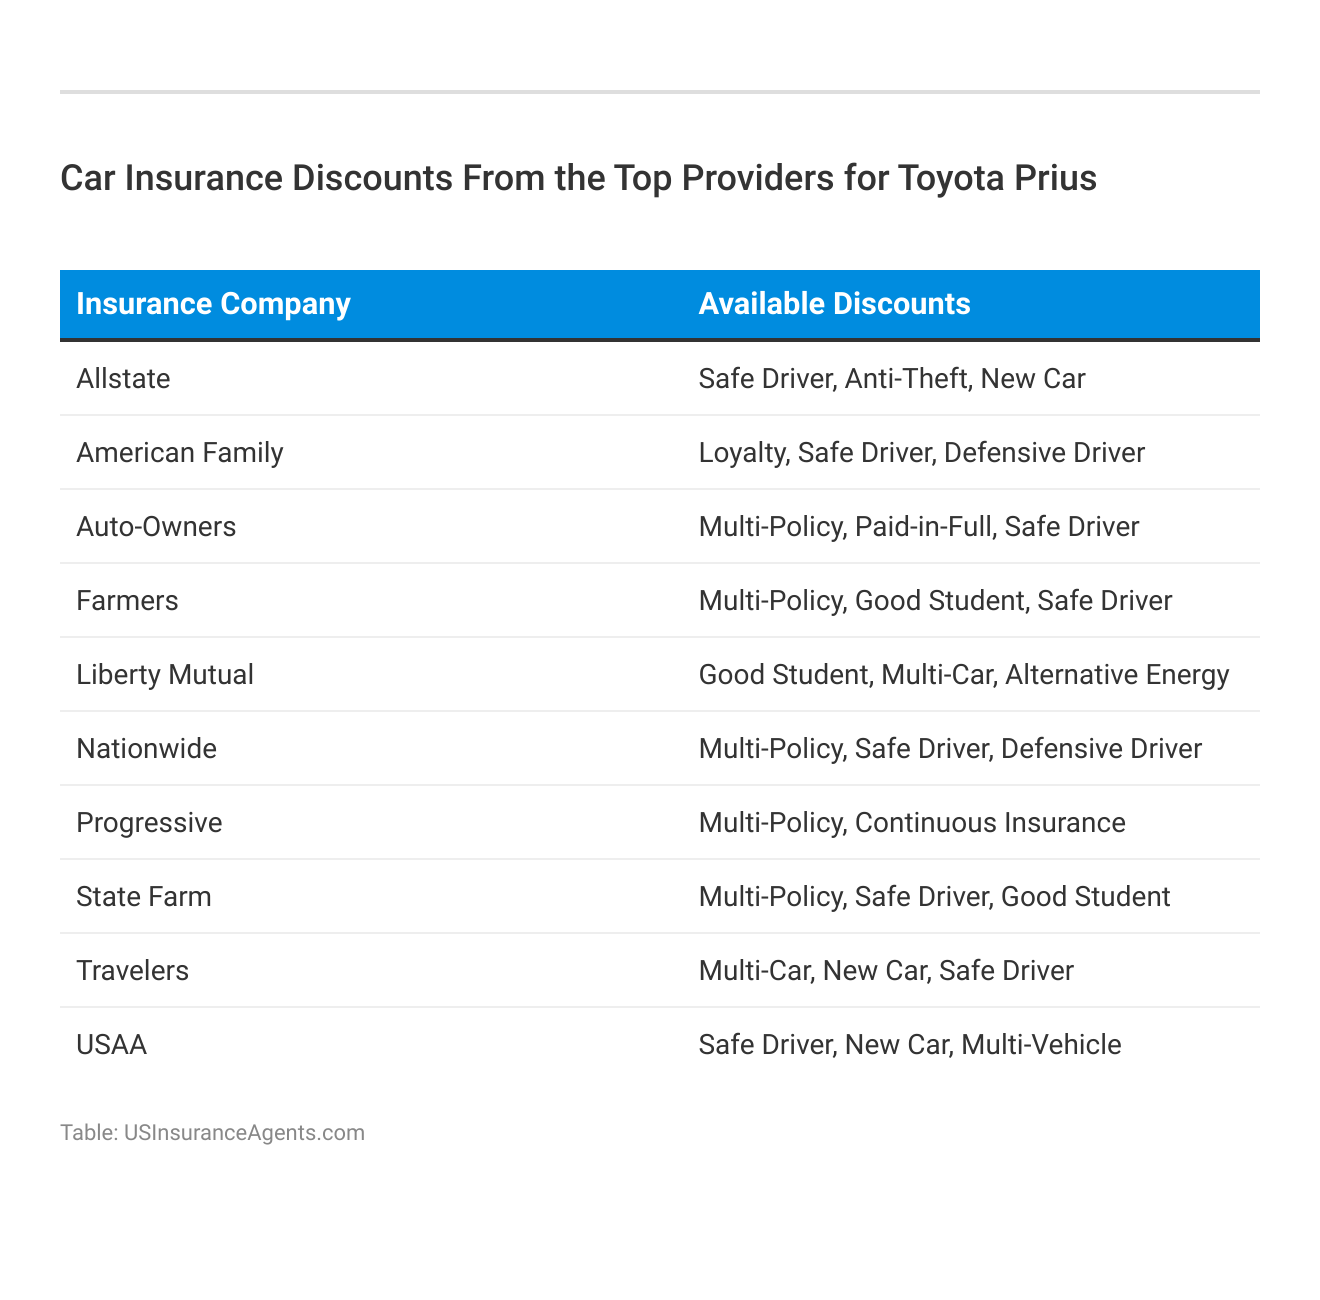 <h3>Car Insurance Discounts From the Top Providers for Toyota Prius</h3>